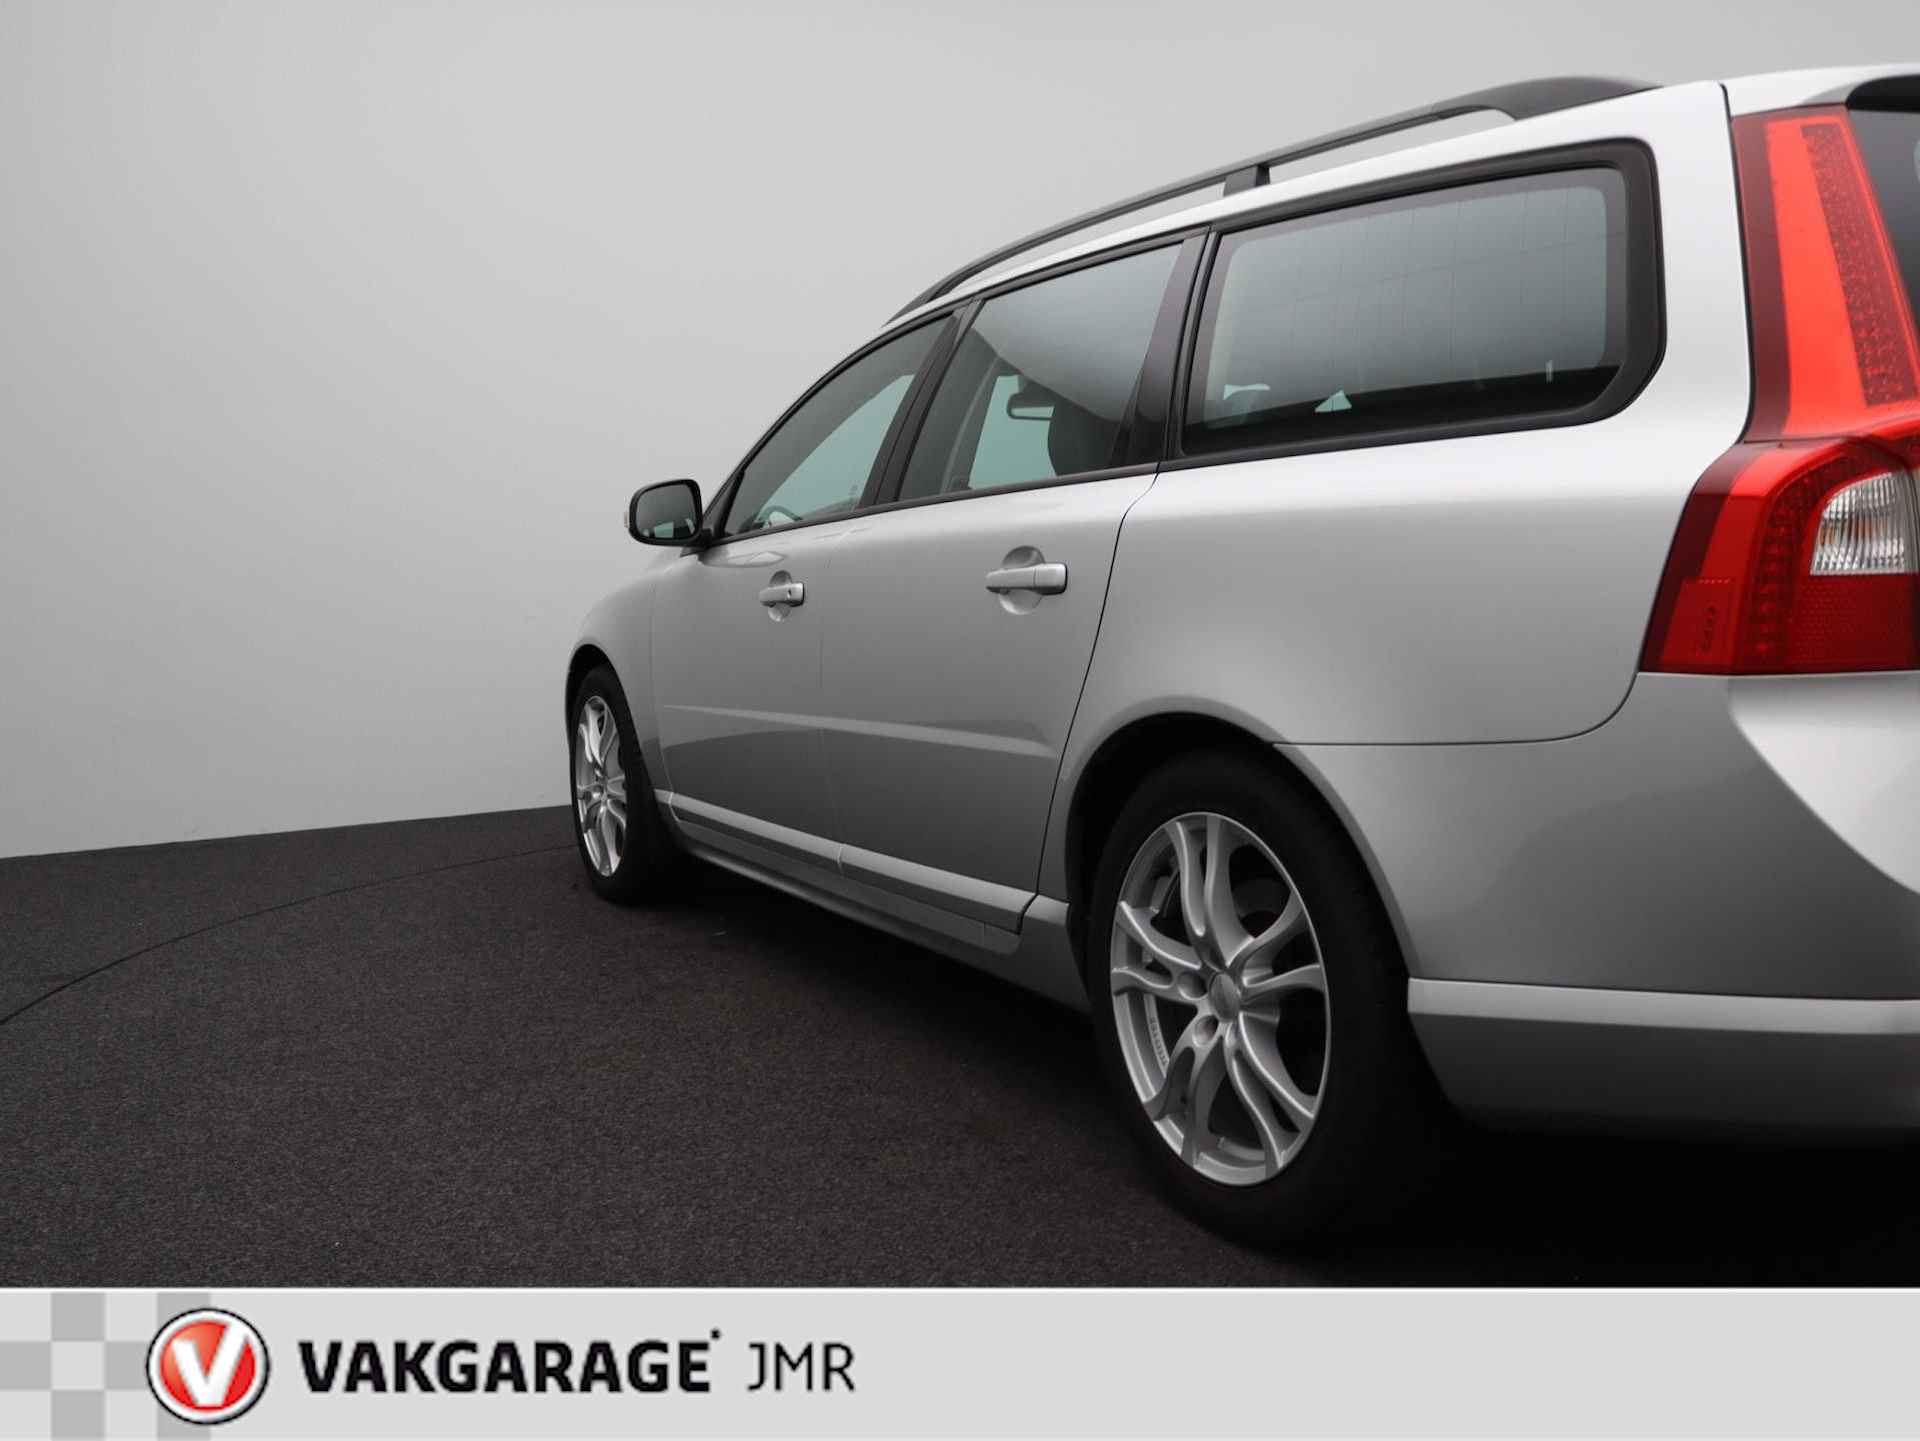 Volvo V70 2.5FT Momentum Youngtimer Trekhaak - PDC Achter - Stoel + Achterbank verwarming - Bluetooth - Climate en Cruise Control - 31/39